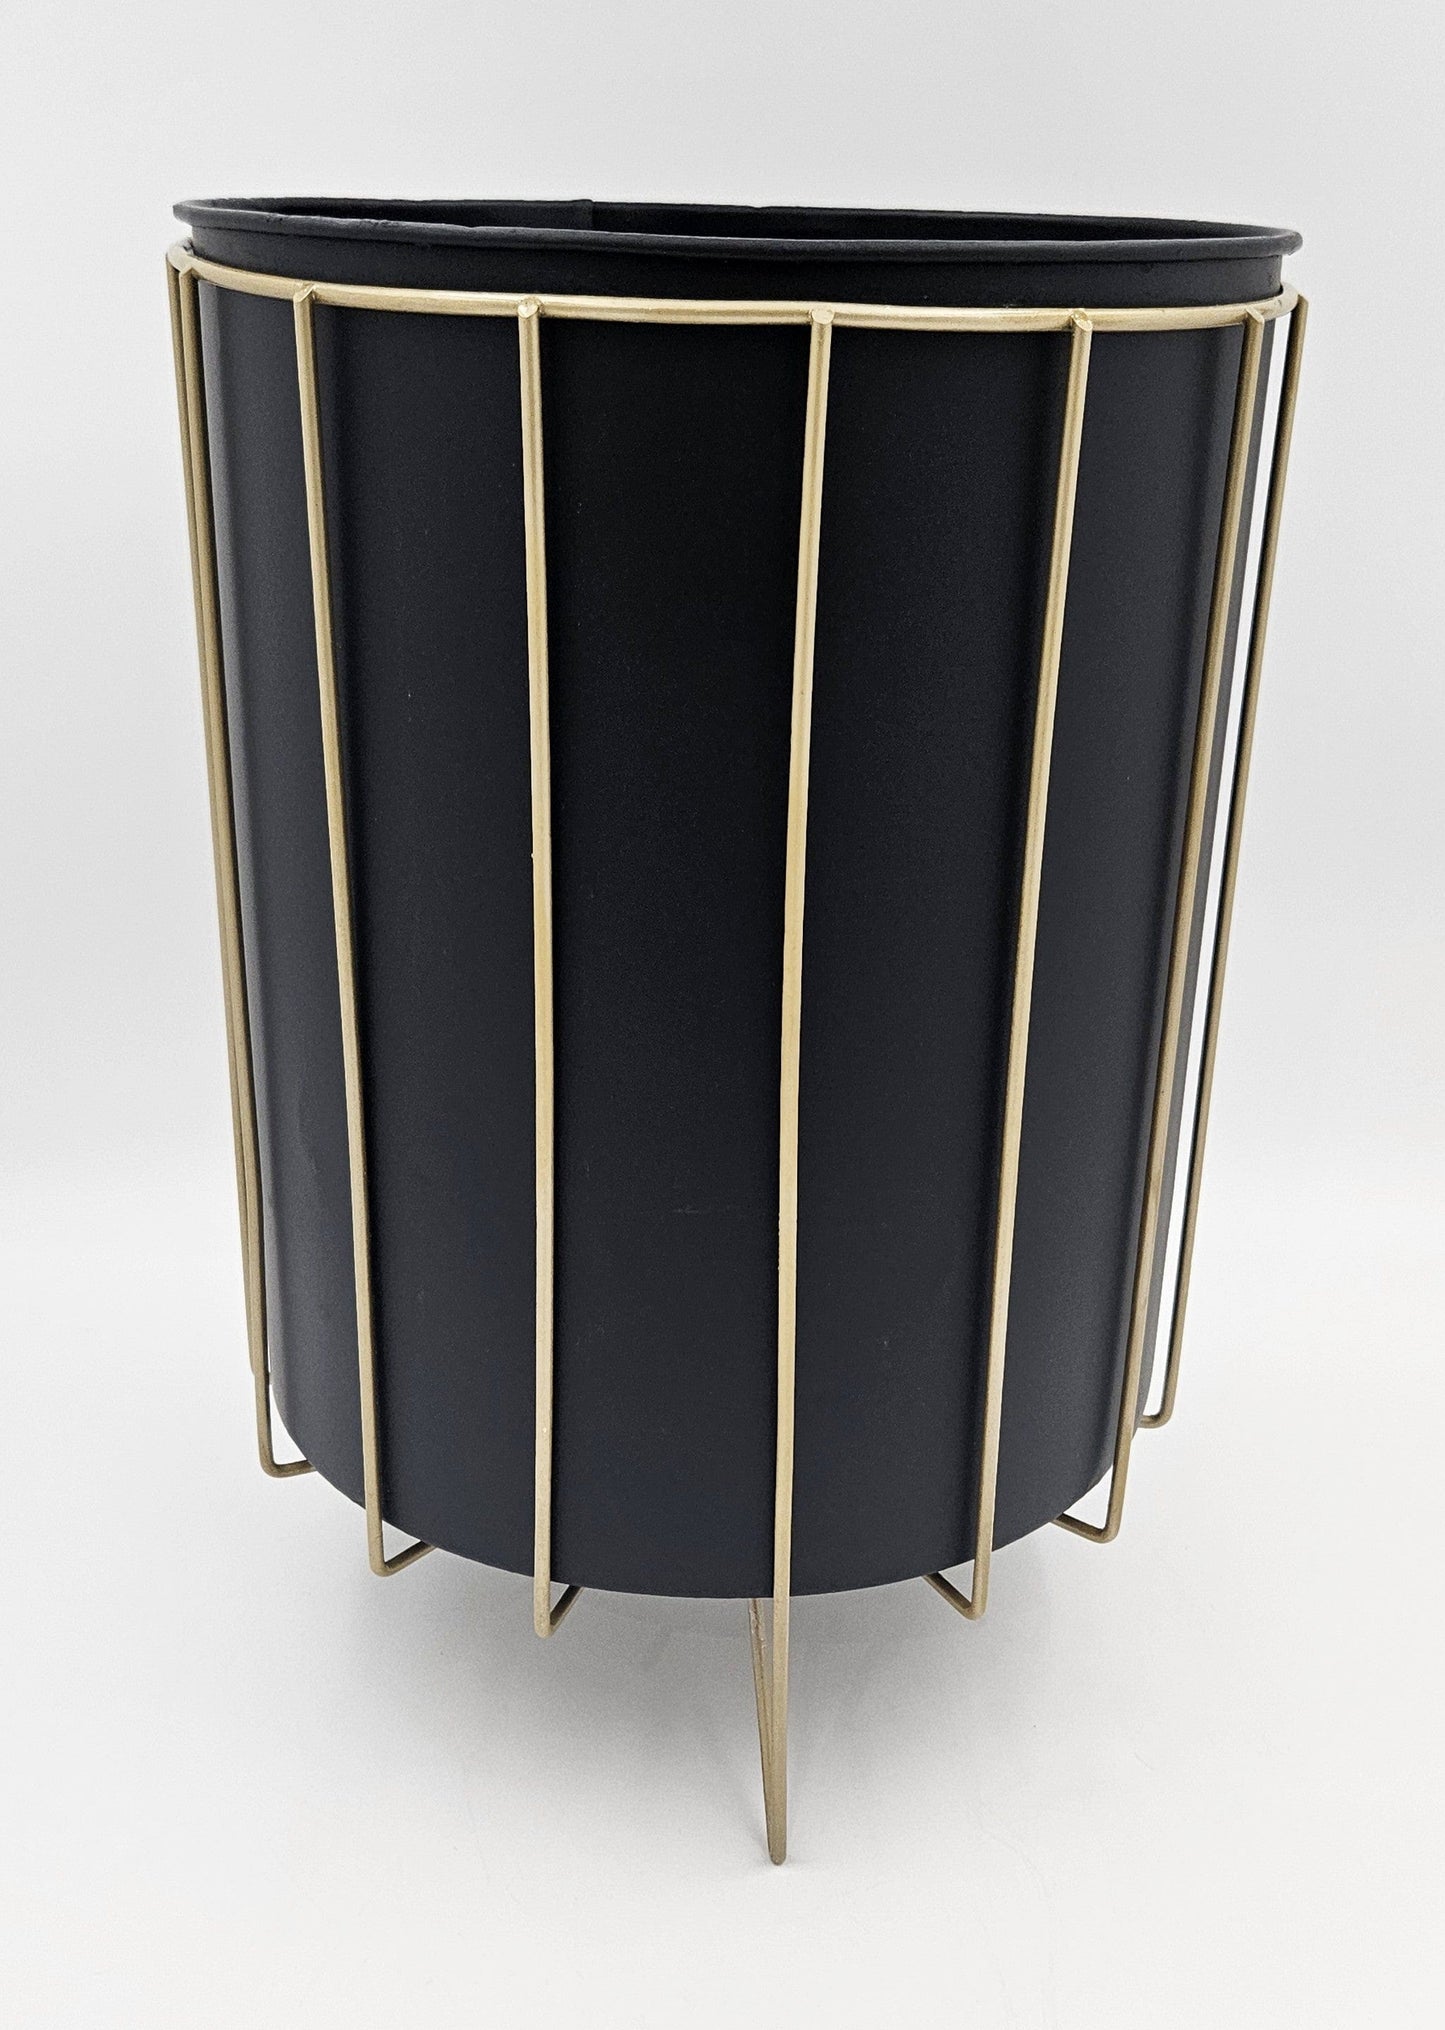 MCM Trash Can Trash Can MCM Retro Atomic Hairpin Black and Gold Steel Trash Can